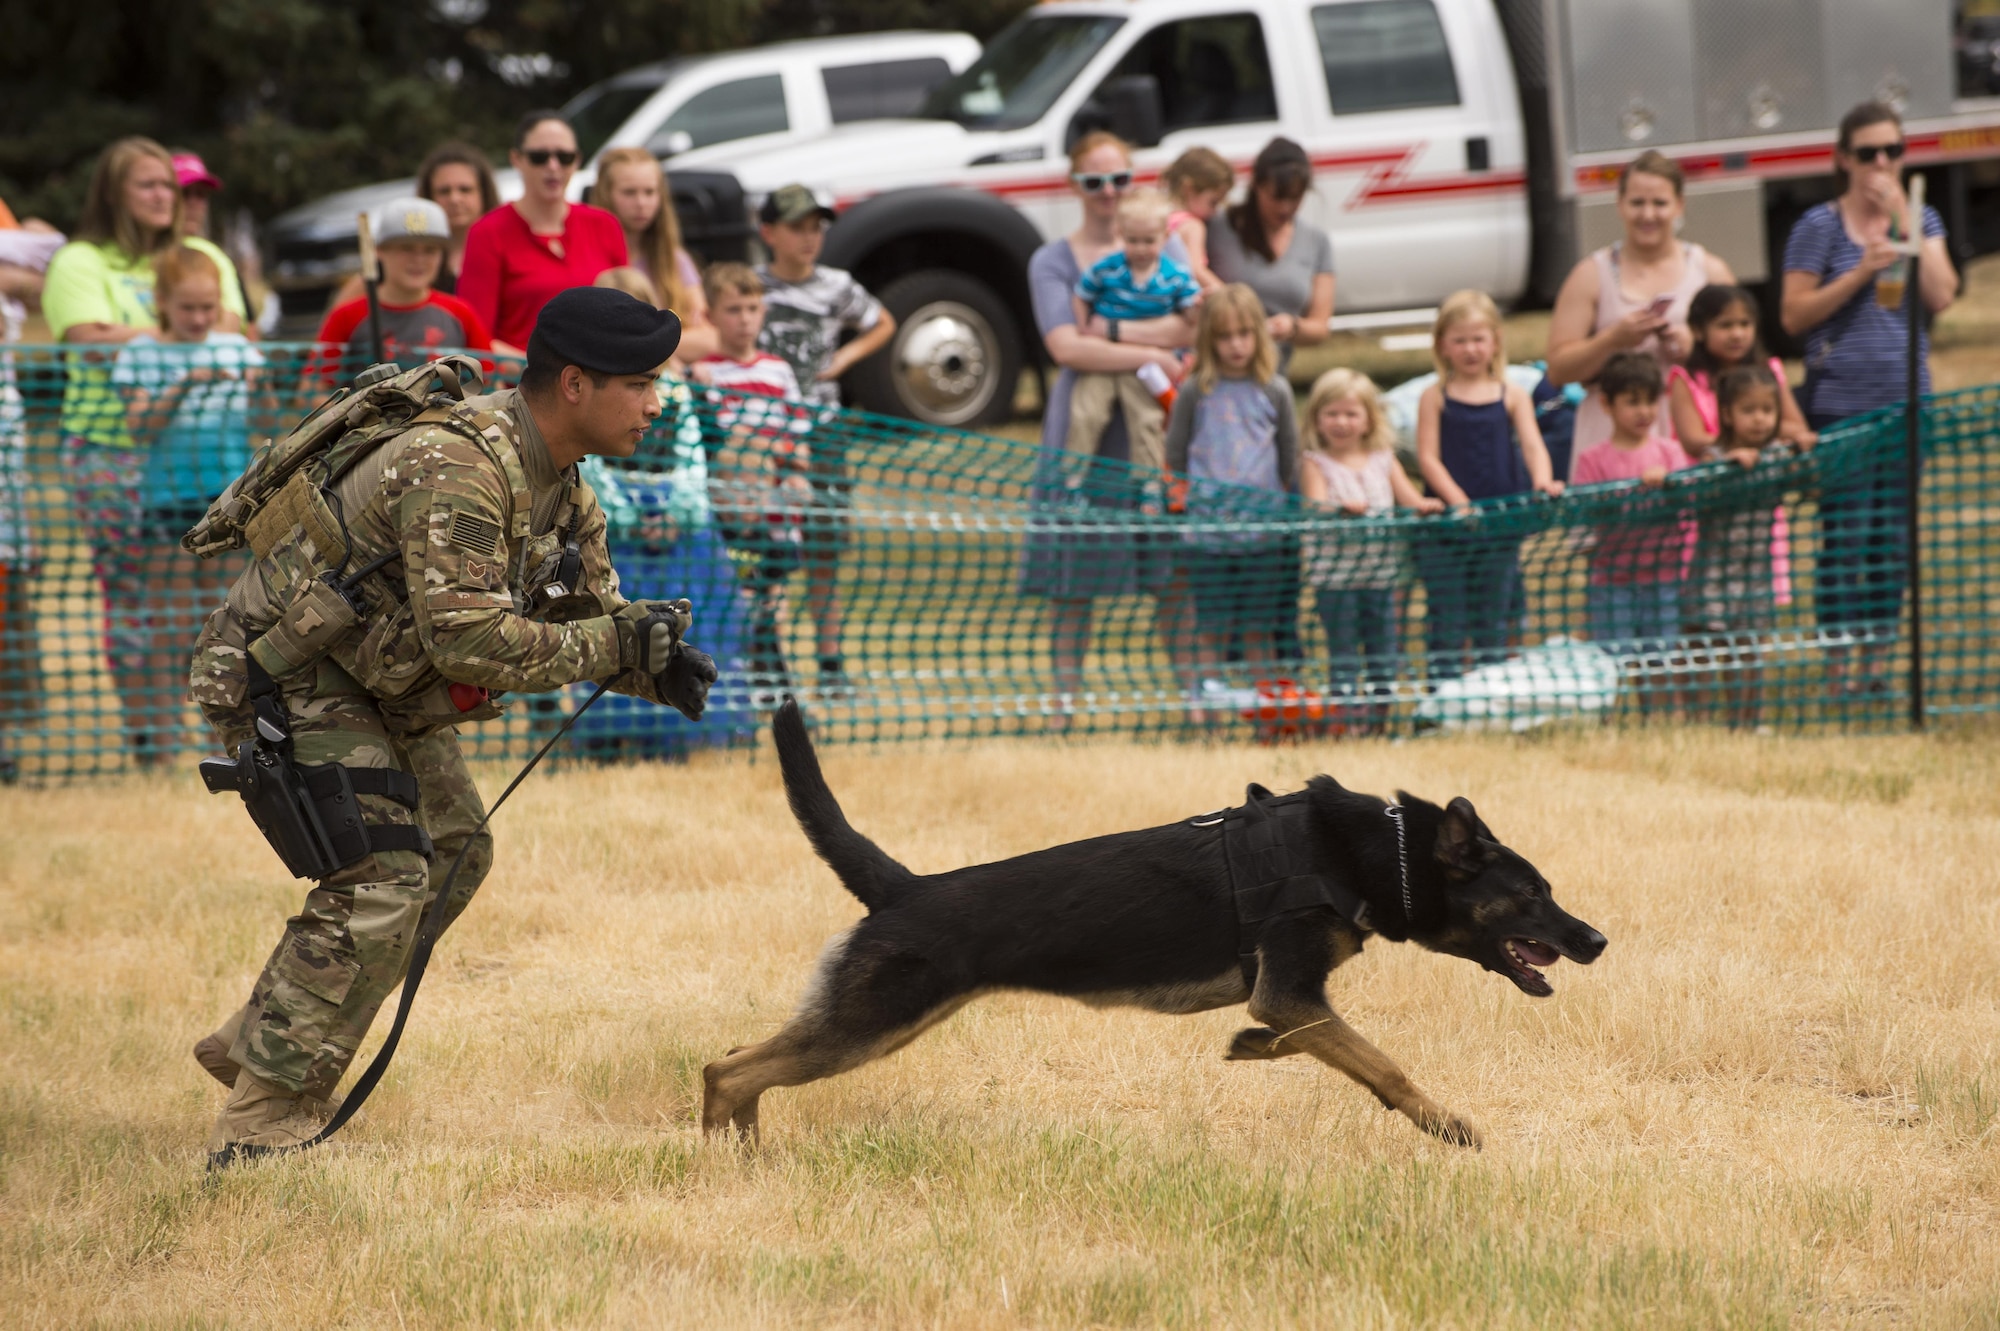 Adults and children look on as Staff Sgt. Desi Padilla, 90th Security Forces Squadron military working dog handler, releases Eby to catch a aggressor for a MWD demonstration during Fort D.A. Russell Days at F.E. Warren Air Force Base, Wyo., July 21, 2017. Dog handlers attend a 55 day training in order to be certified to work with the dogs on base. This year marks the 150th anniversary of F.E. Warren Air Force Base, and the annual base open house brings military and civilian communities together to learn more about the base’s rich history. (U.S. Air Force photo by Staff Sgt. Christopher Ruano)

